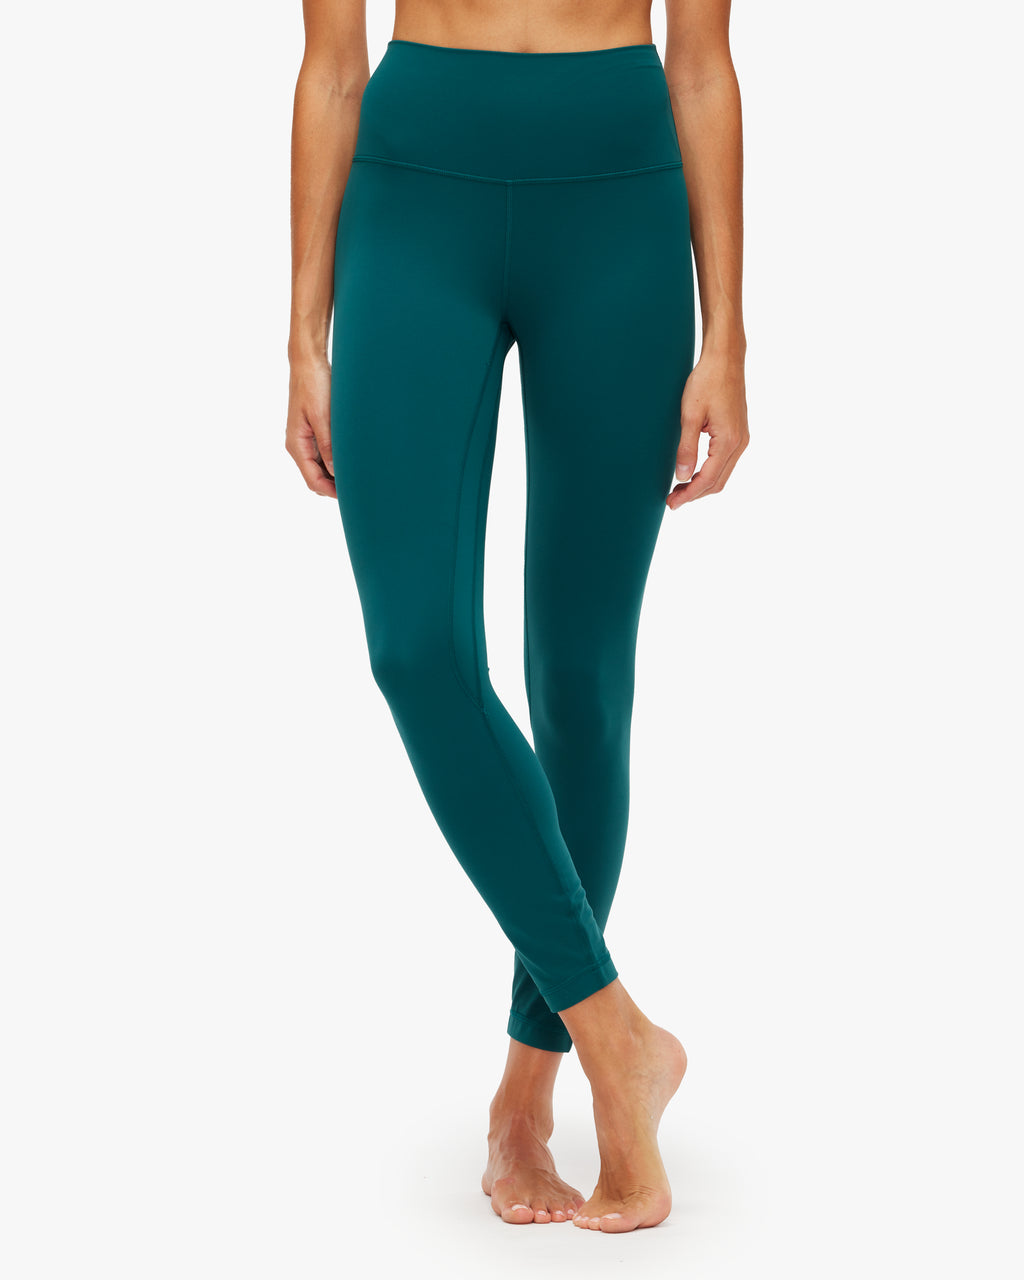 lululemon Align™ High Rise Pant 25 *double lined